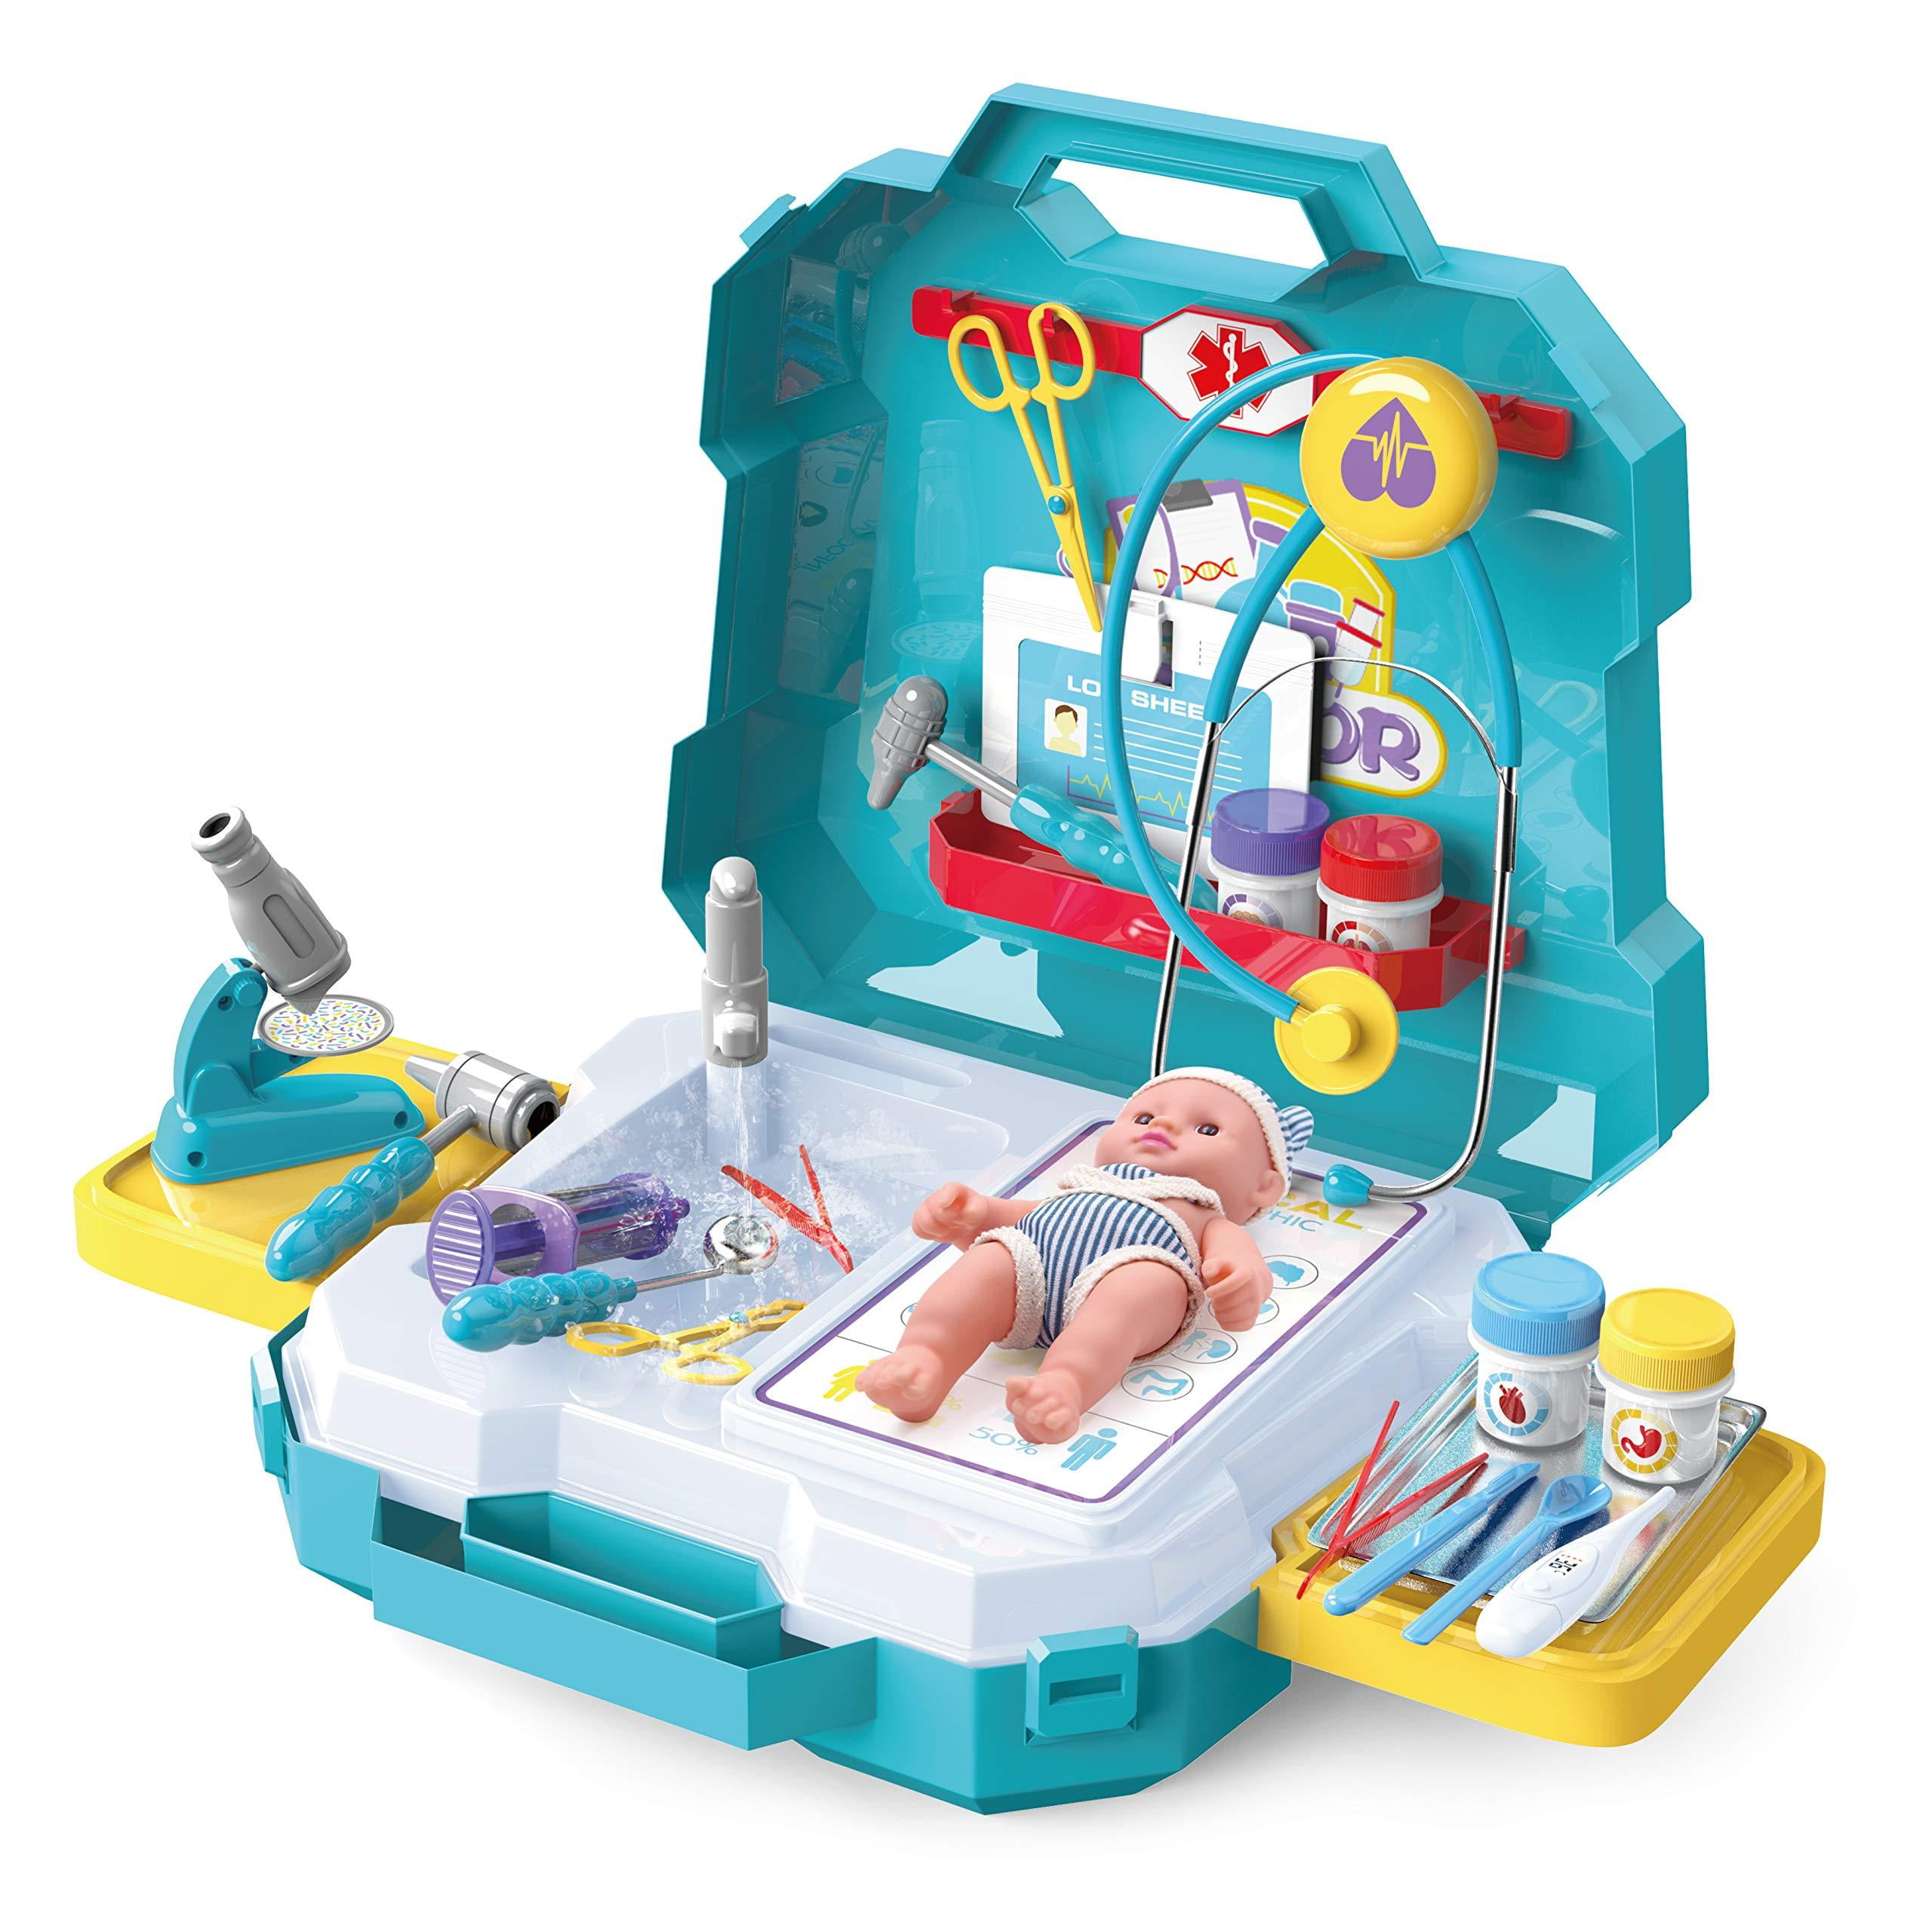 Joyin 29 Pieces Medical Toy Kids Doctor Pretend Play Kit With Carrying